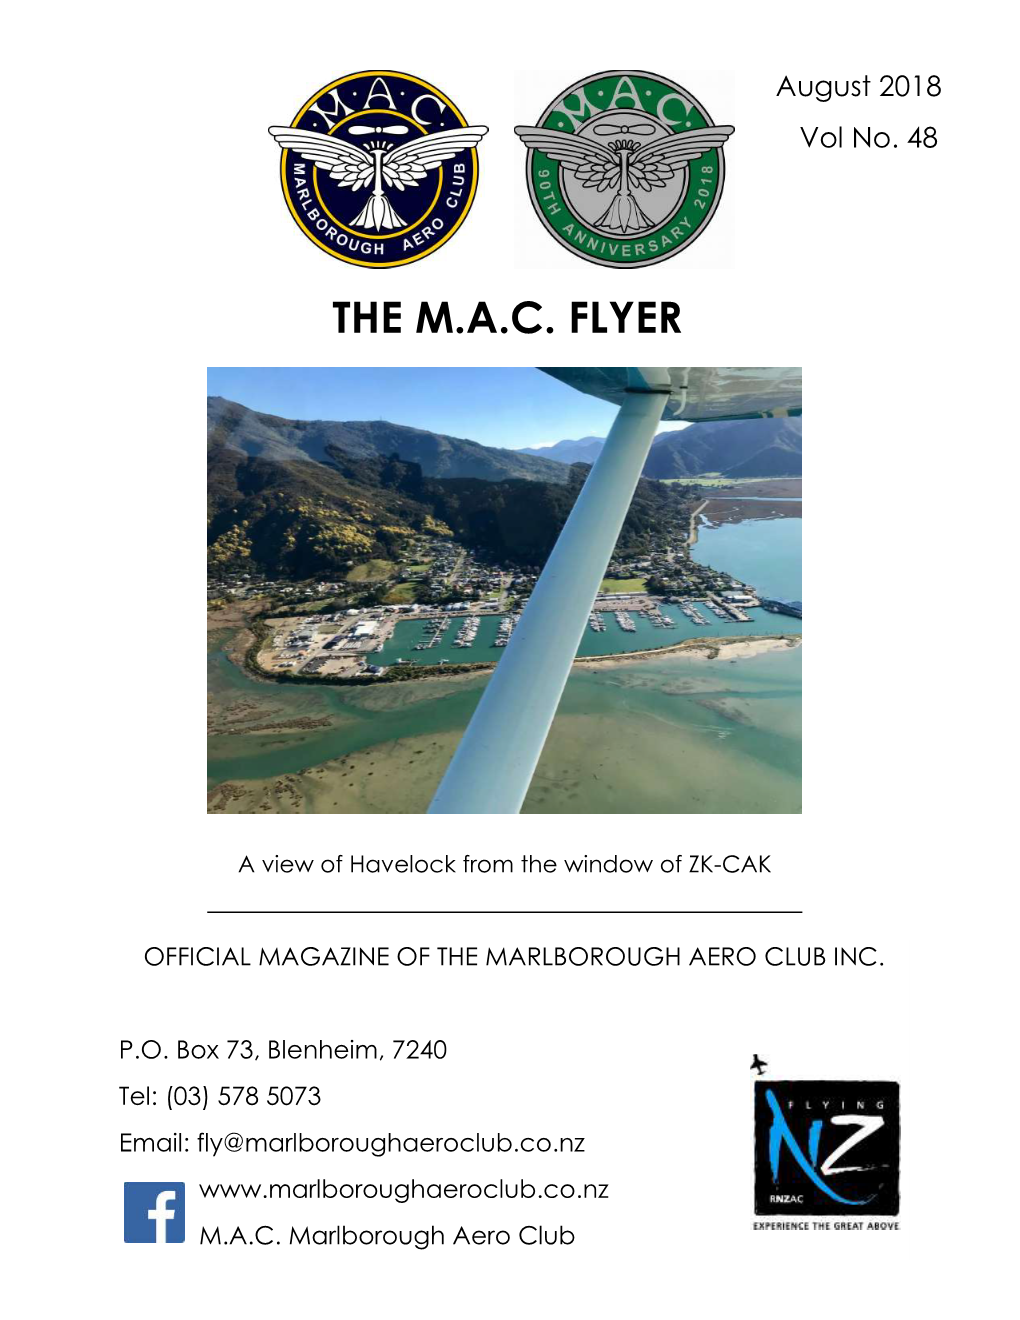 The M.A.C. Flyer